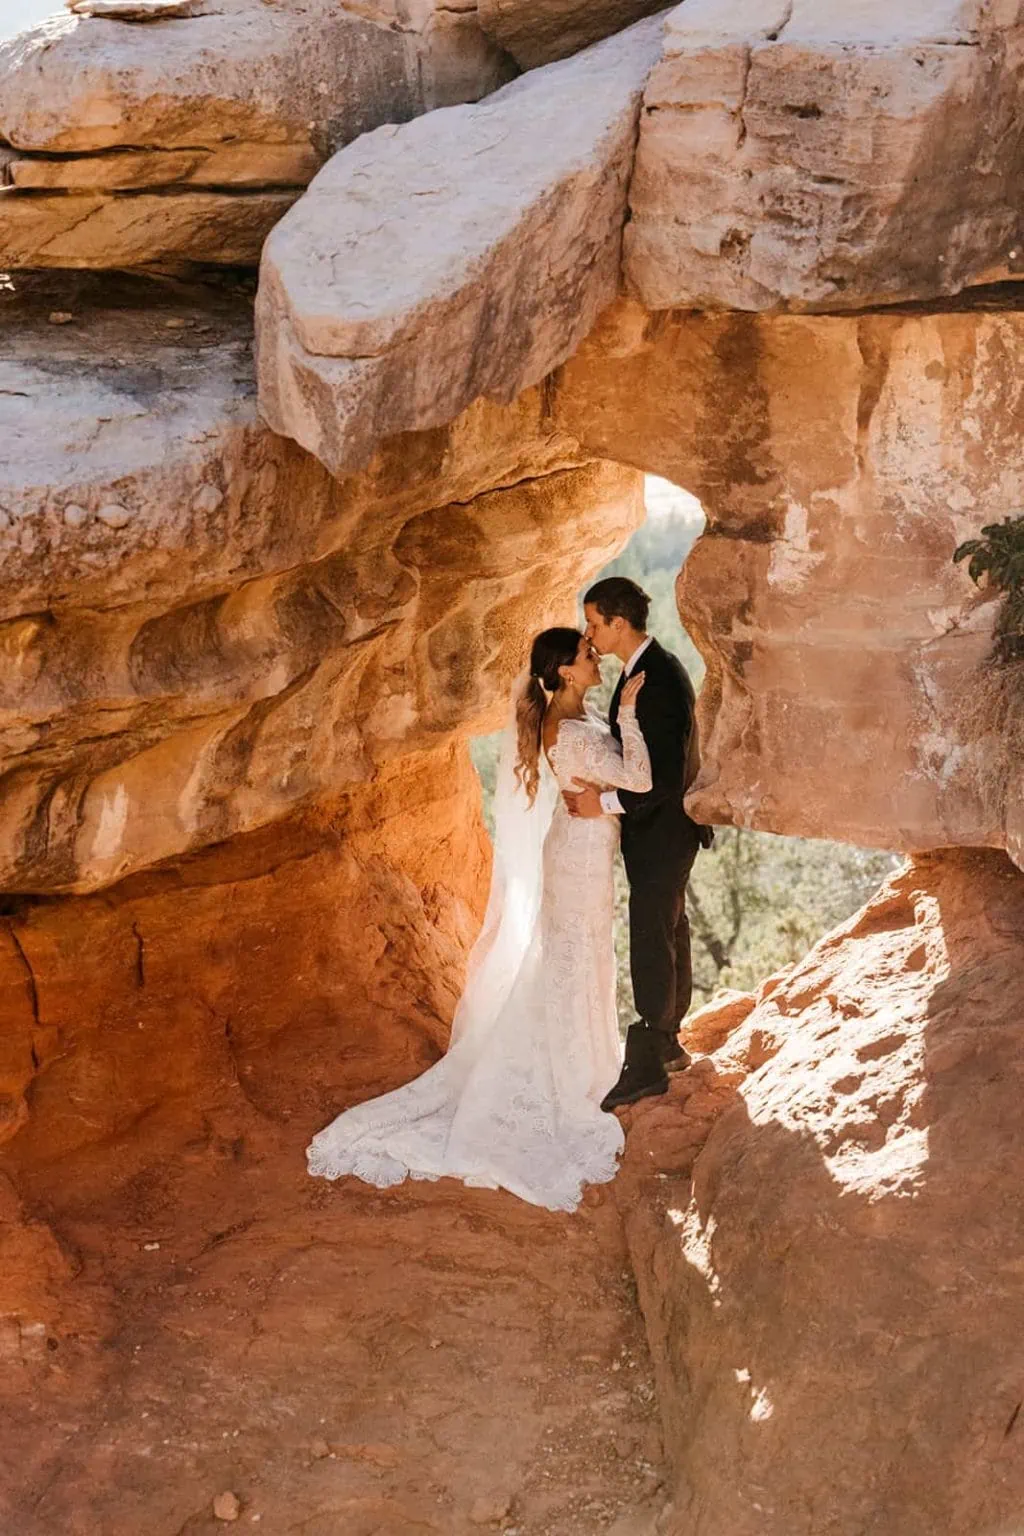 A bride and groom stand together in a cave and the groom kisses the brides forehead.